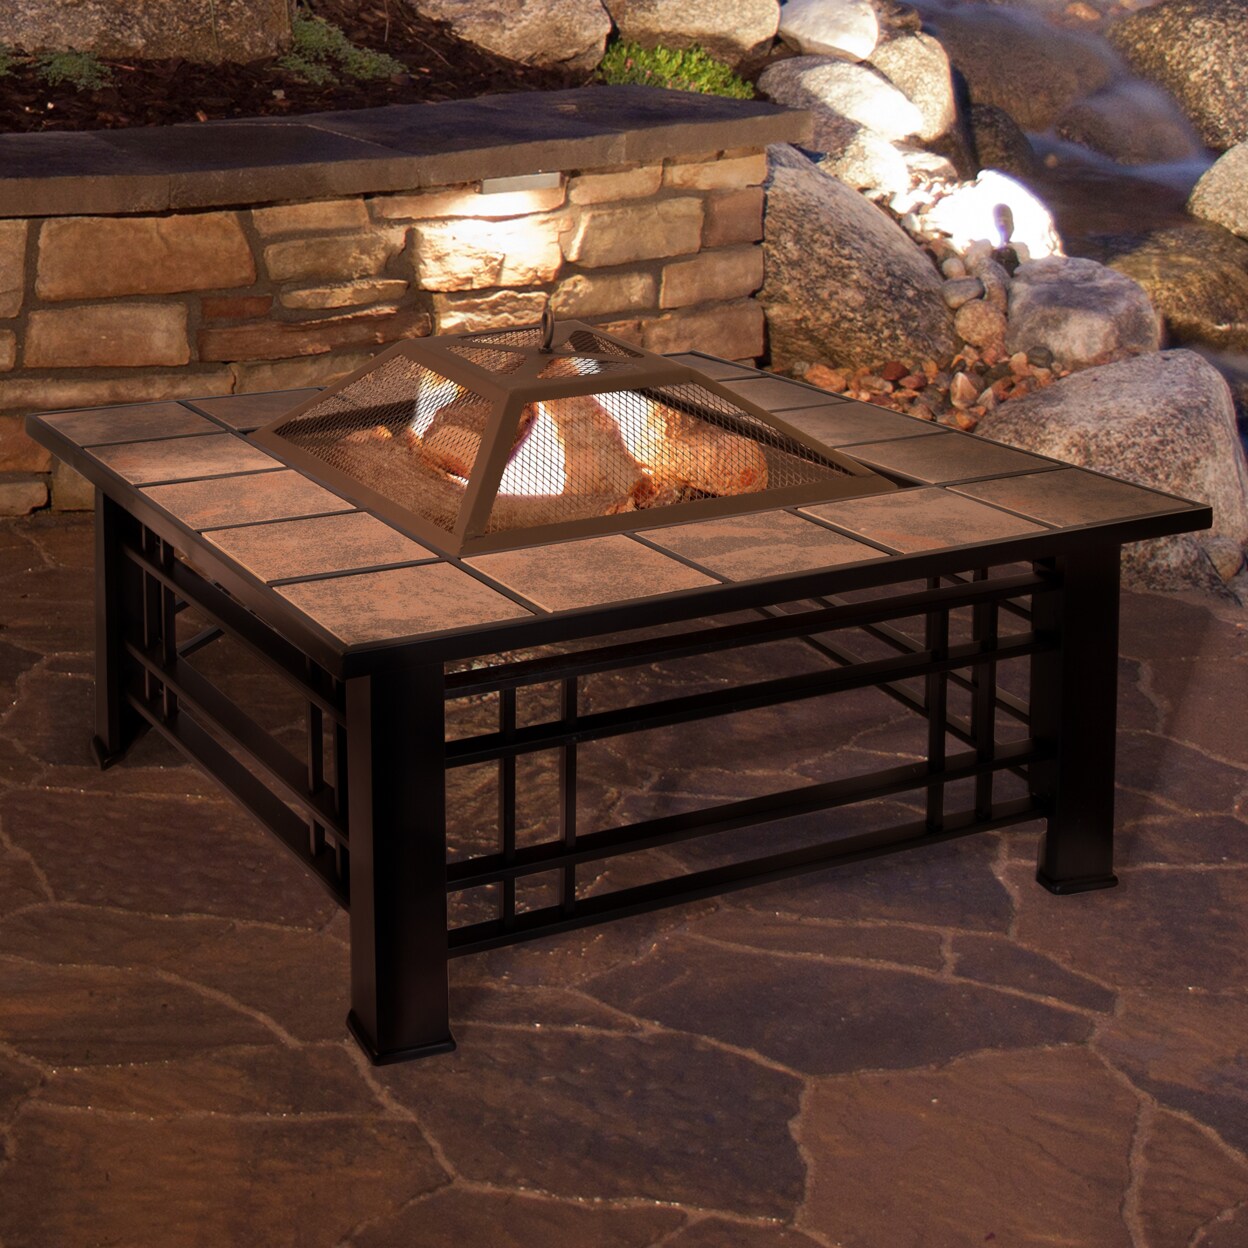 Pure Garden Fire Pit Set Wood Burning Pit - Includes Spark Screen and Log Poker - Great for Outdoor and Patio 32 Inch Tile Firepit